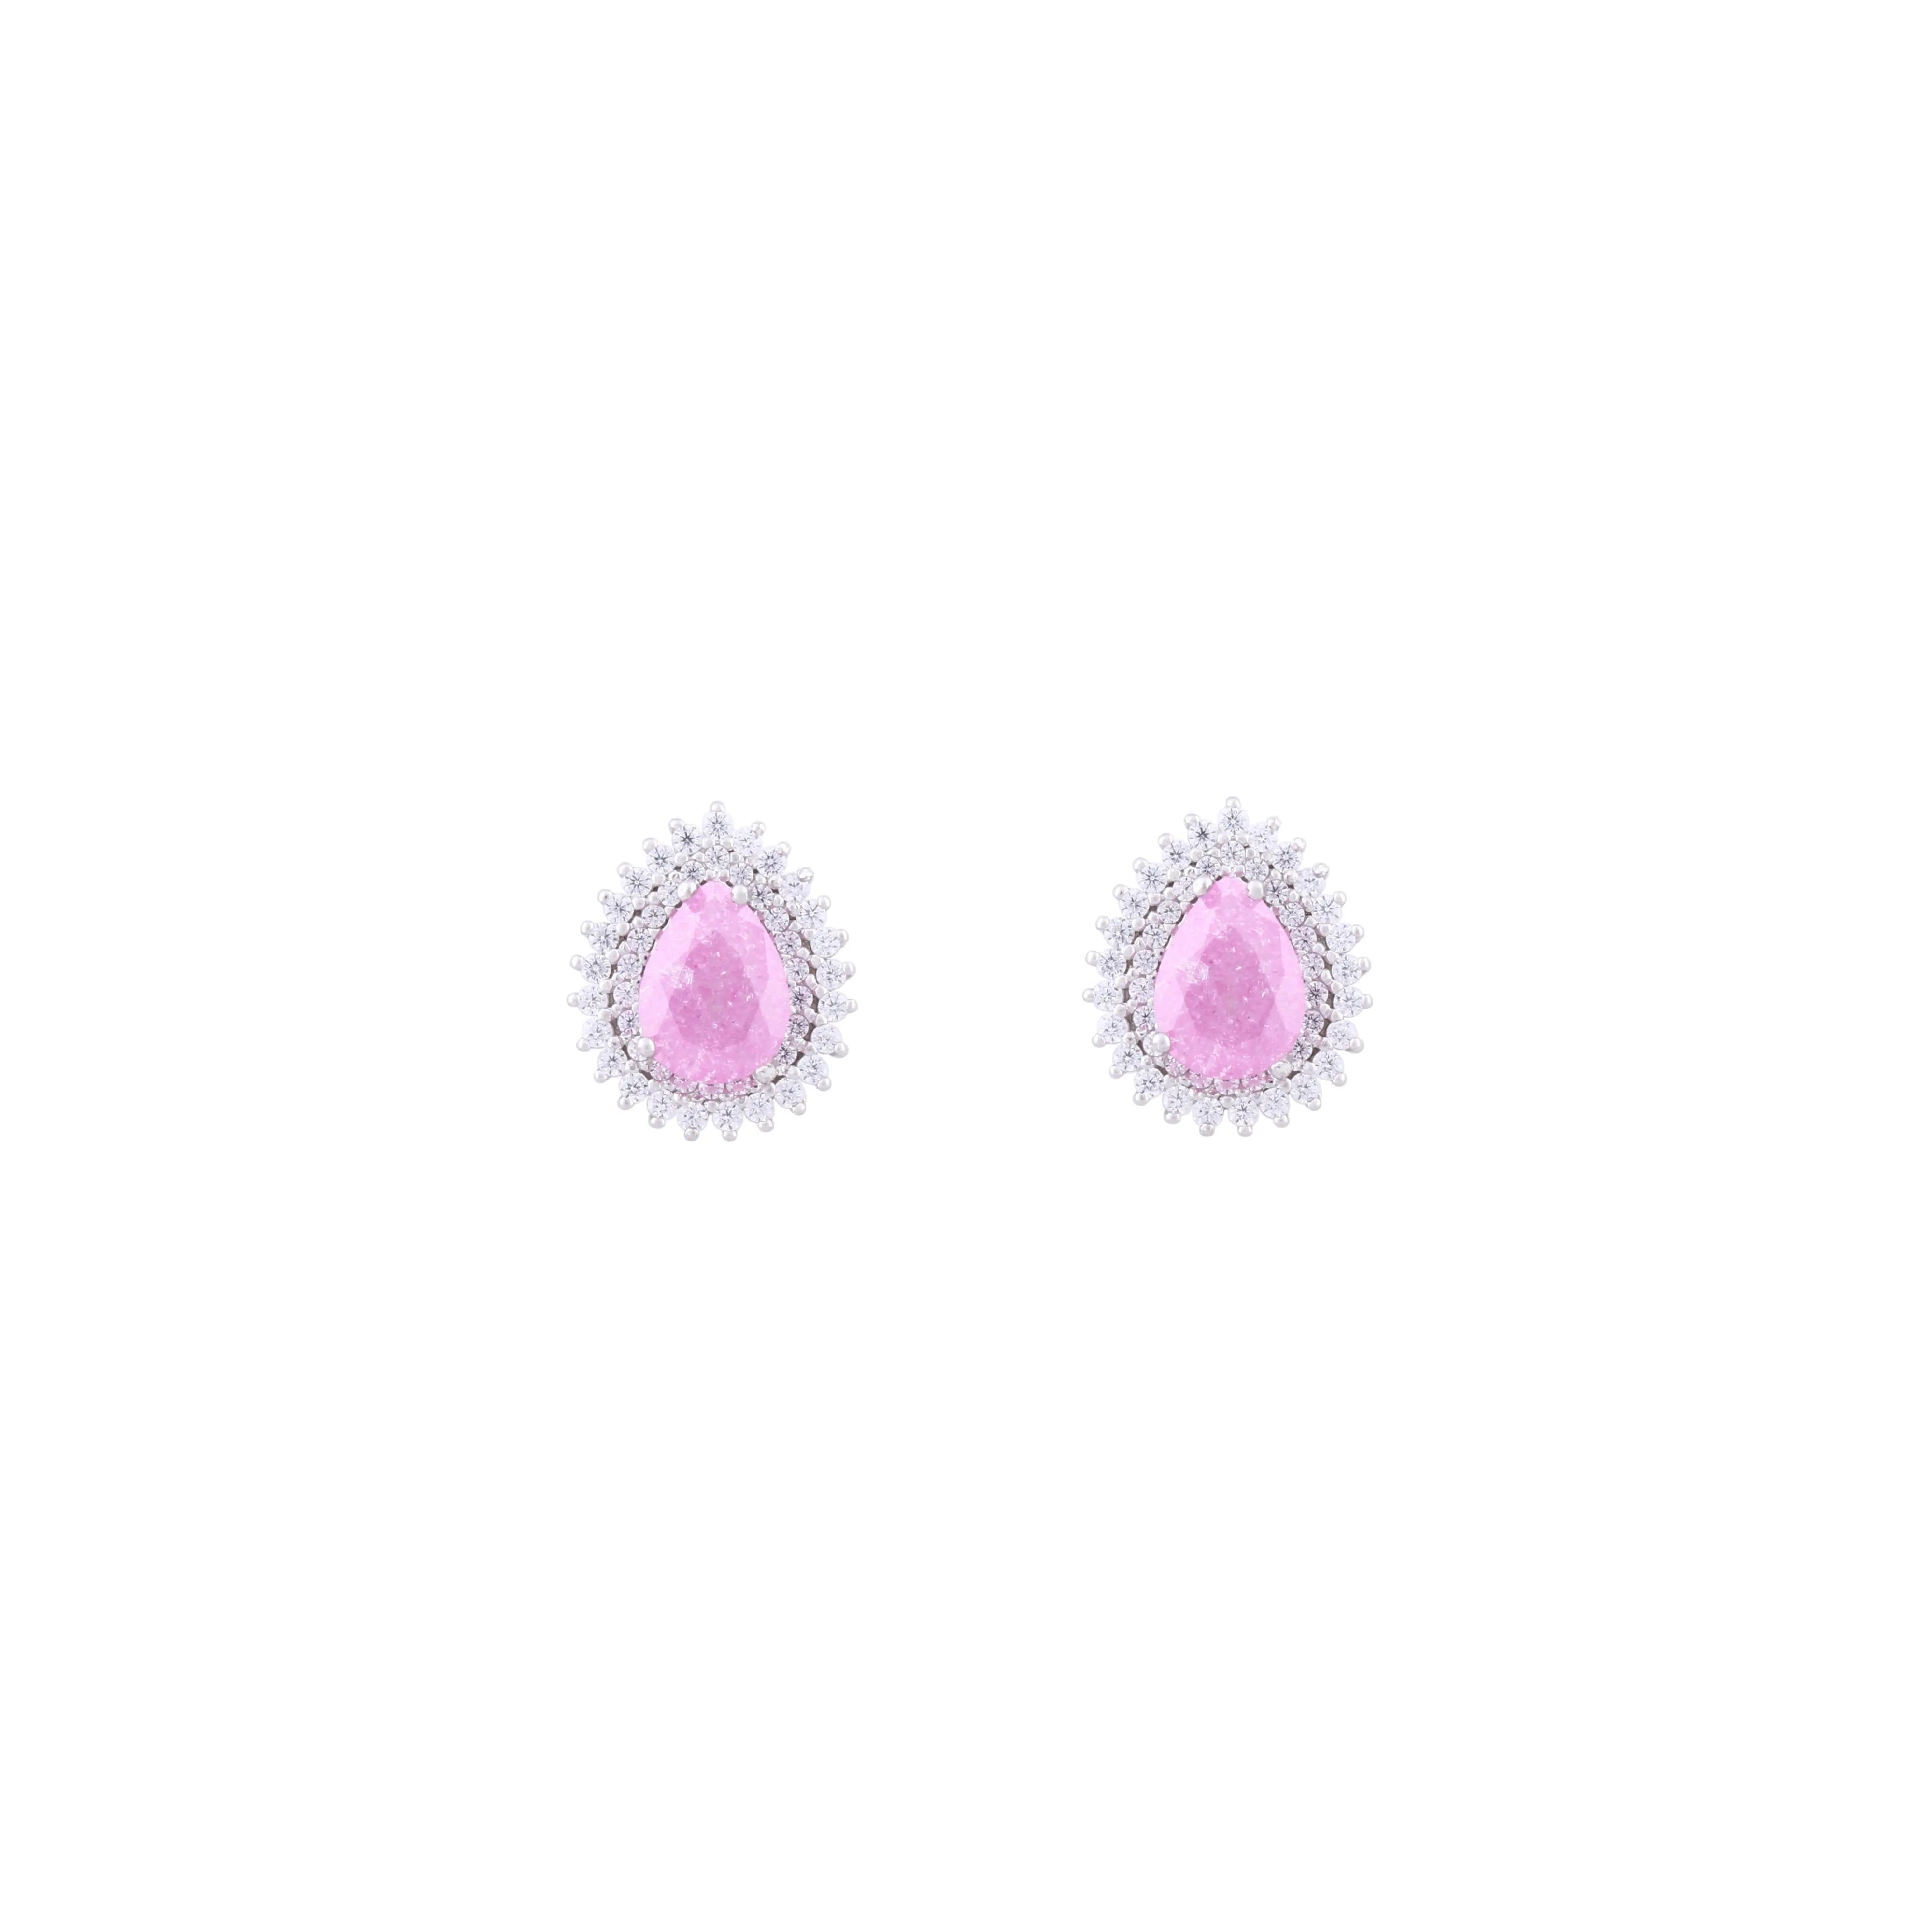 Asfour Stud Earrings made of 925 sterling silver, with a pear design, inlaid with a Rose zircon Stone and decorated with zircon Stones